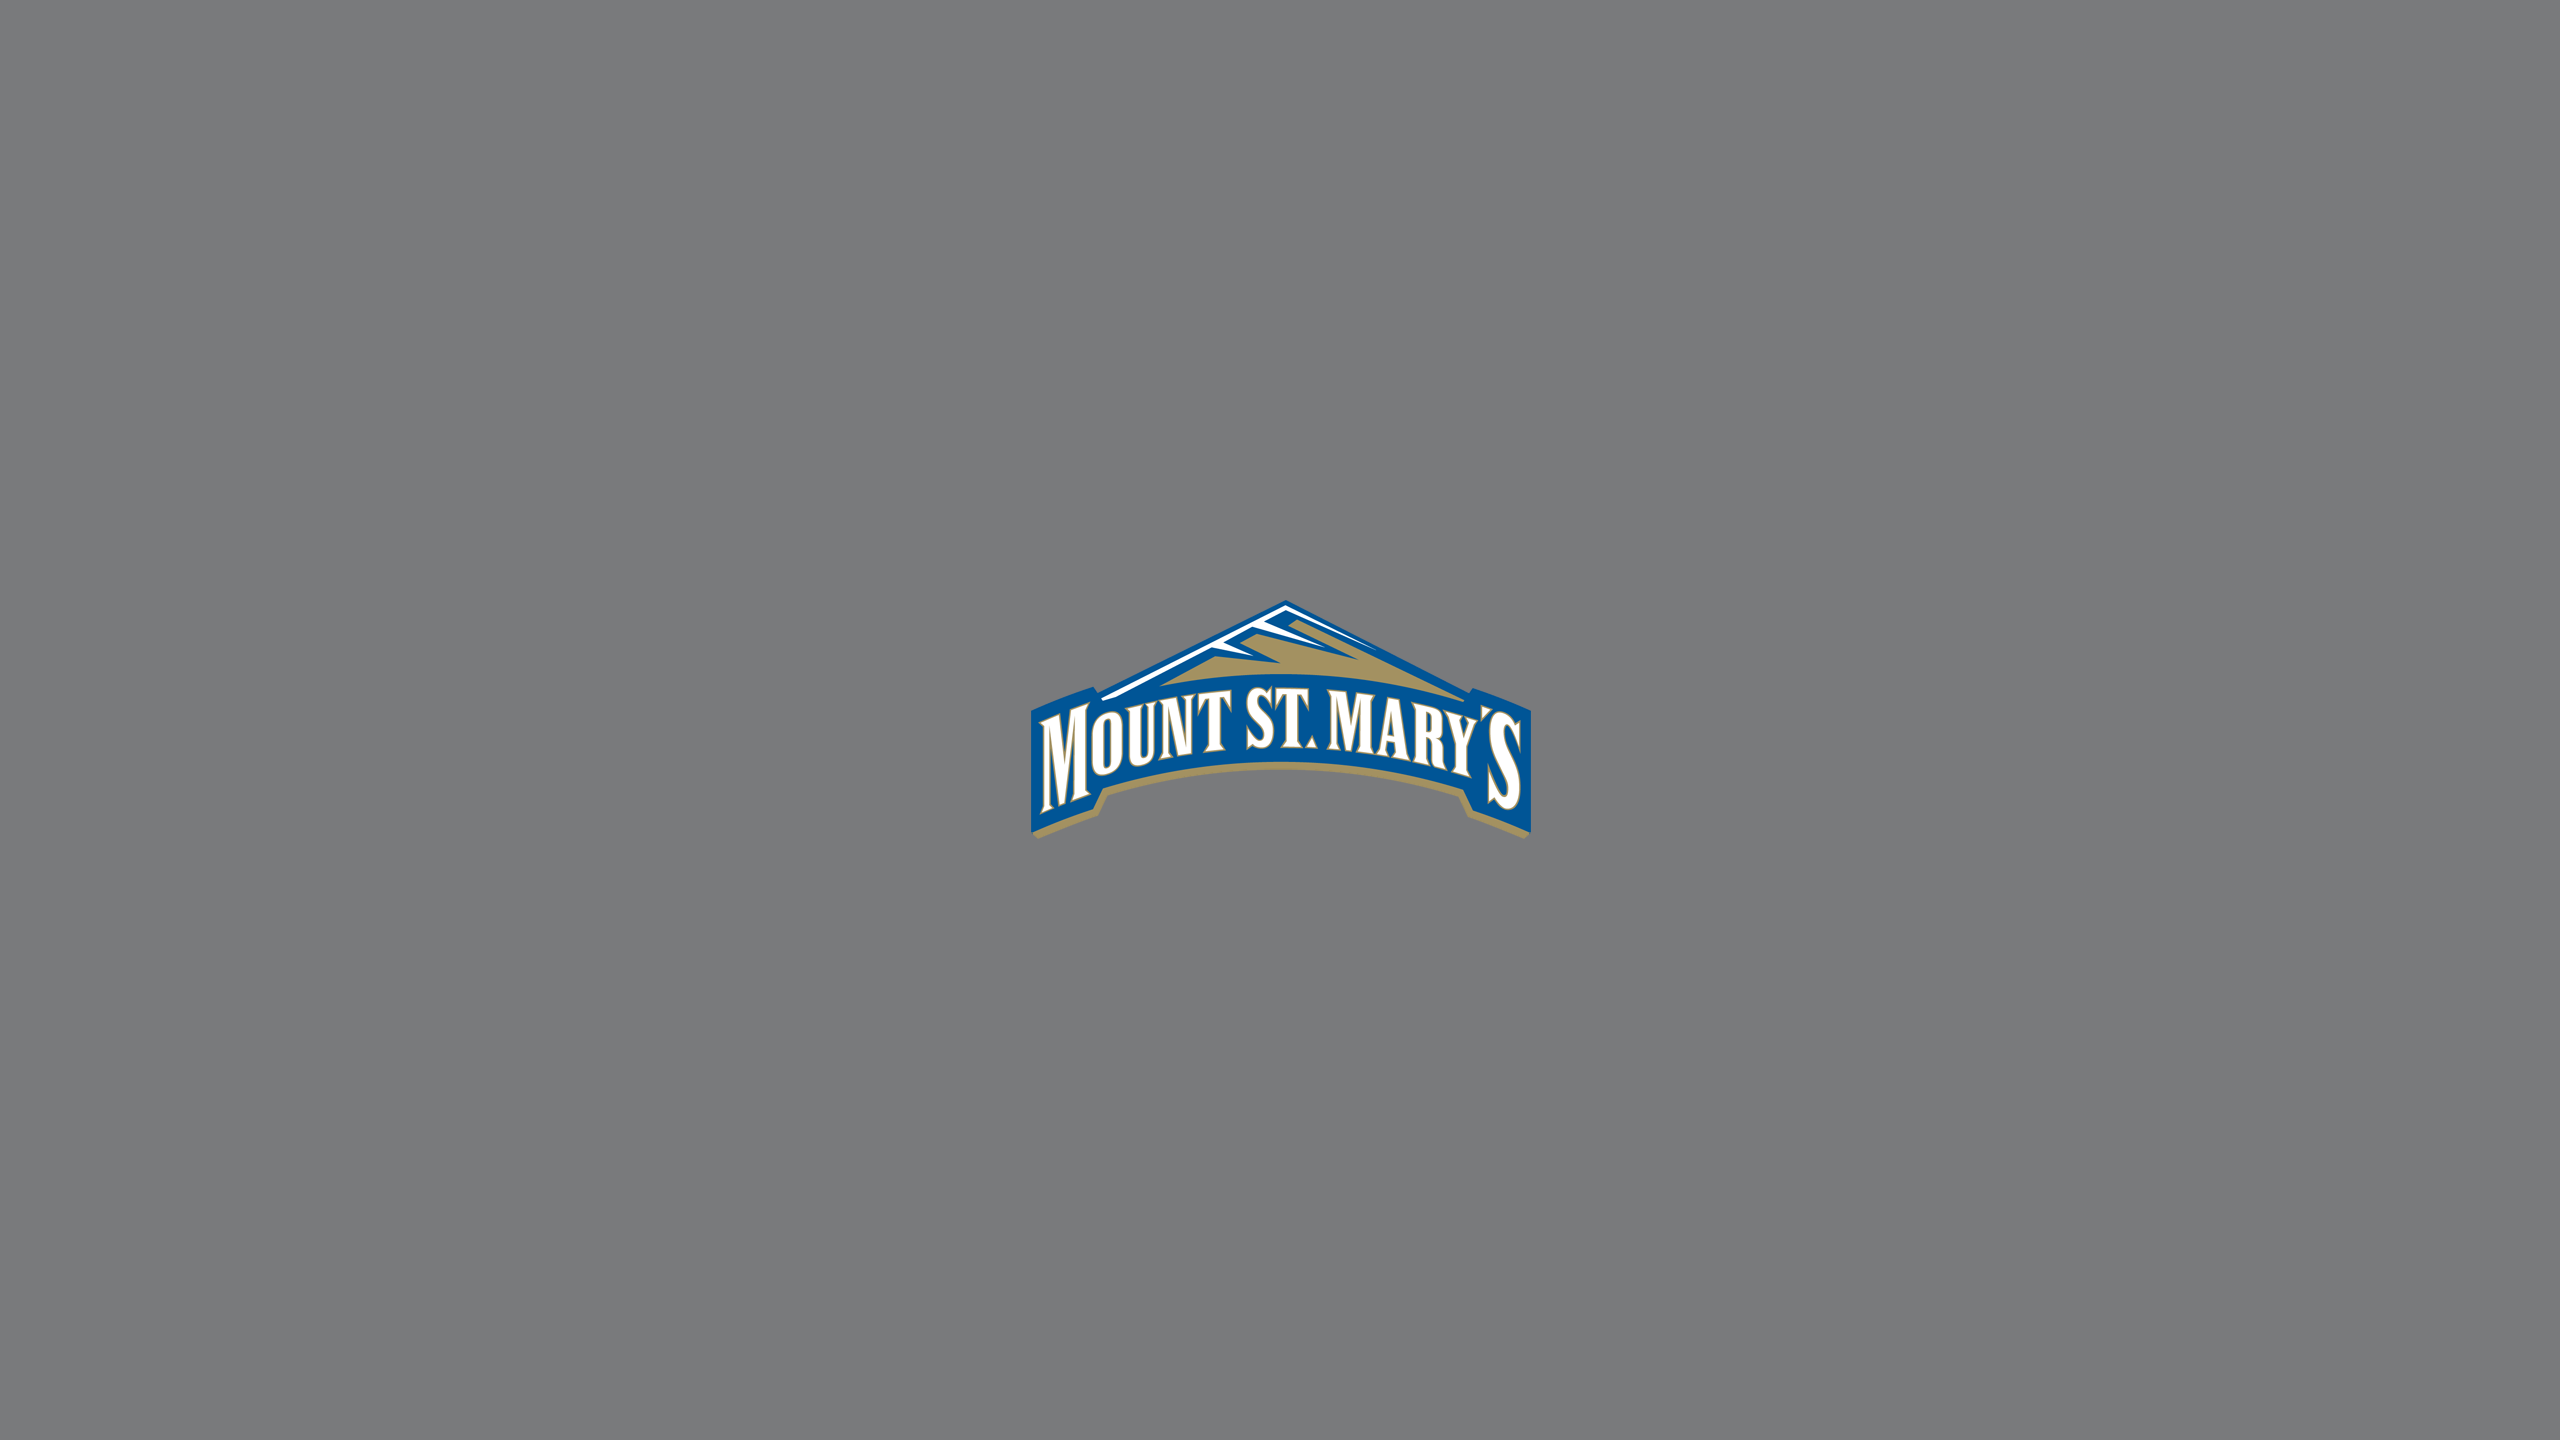 Mount St. Mary's Mountaineers Basketball - NCAAB - Square Bettor